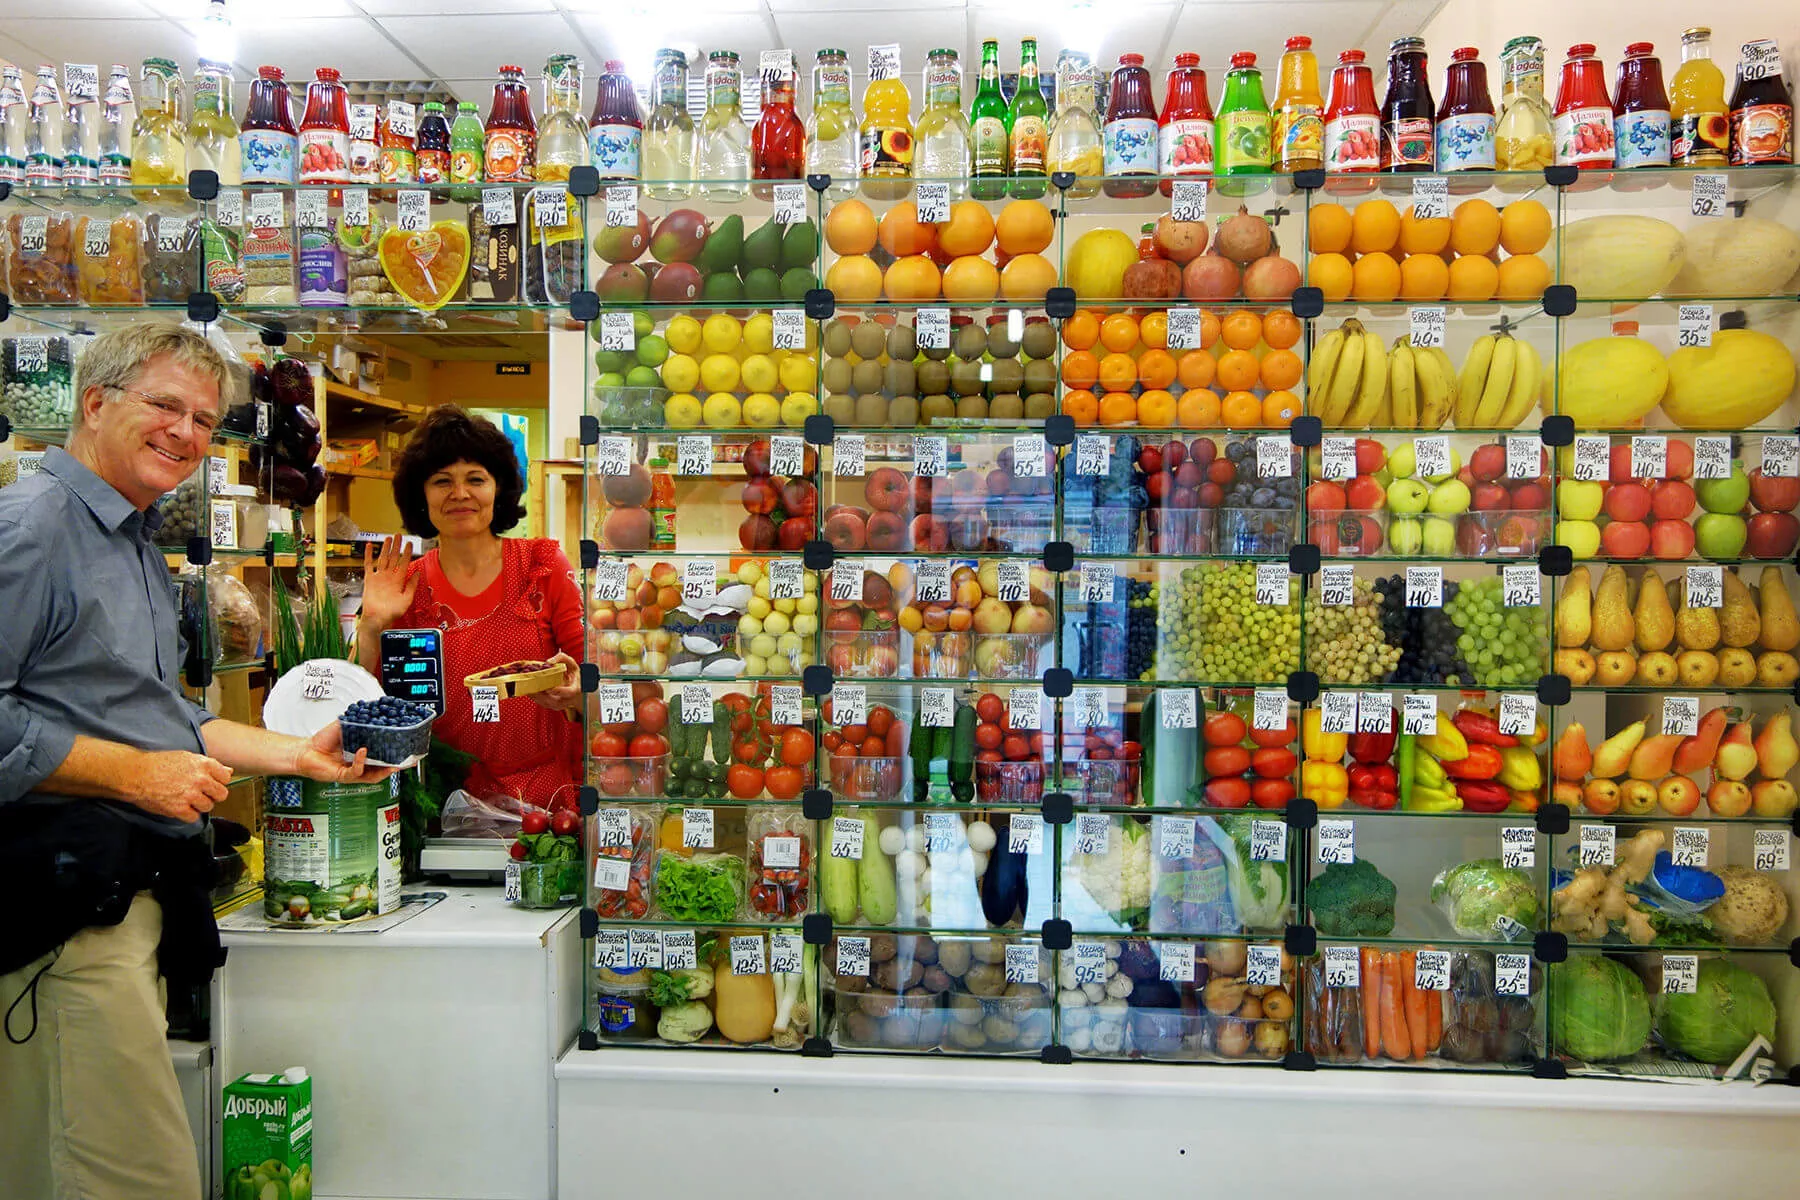 Grocery stores in St. Petersburg brim with colorful drinks, pickled goodies, fresh produce, and friendly locals